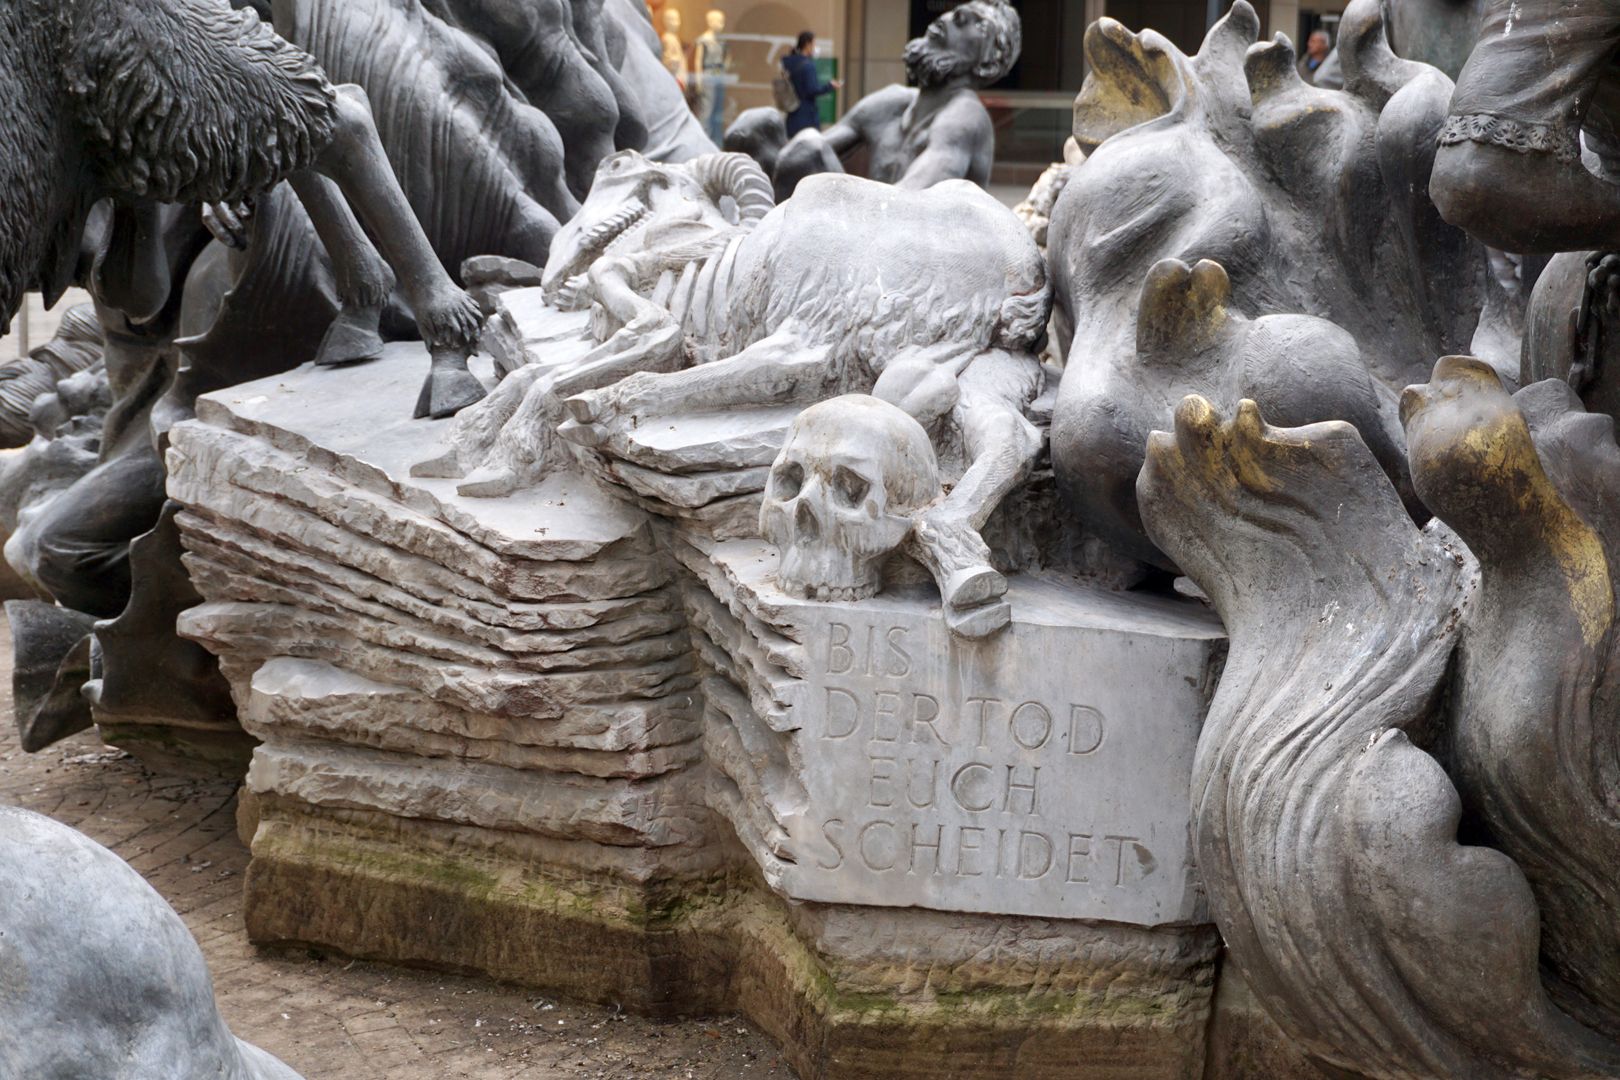 Marriage carousel/ Hans Sachs Fountain Marital rock, on which the dead couple is displayed as the billy goat perished and as a human skull. "Till death you to part."